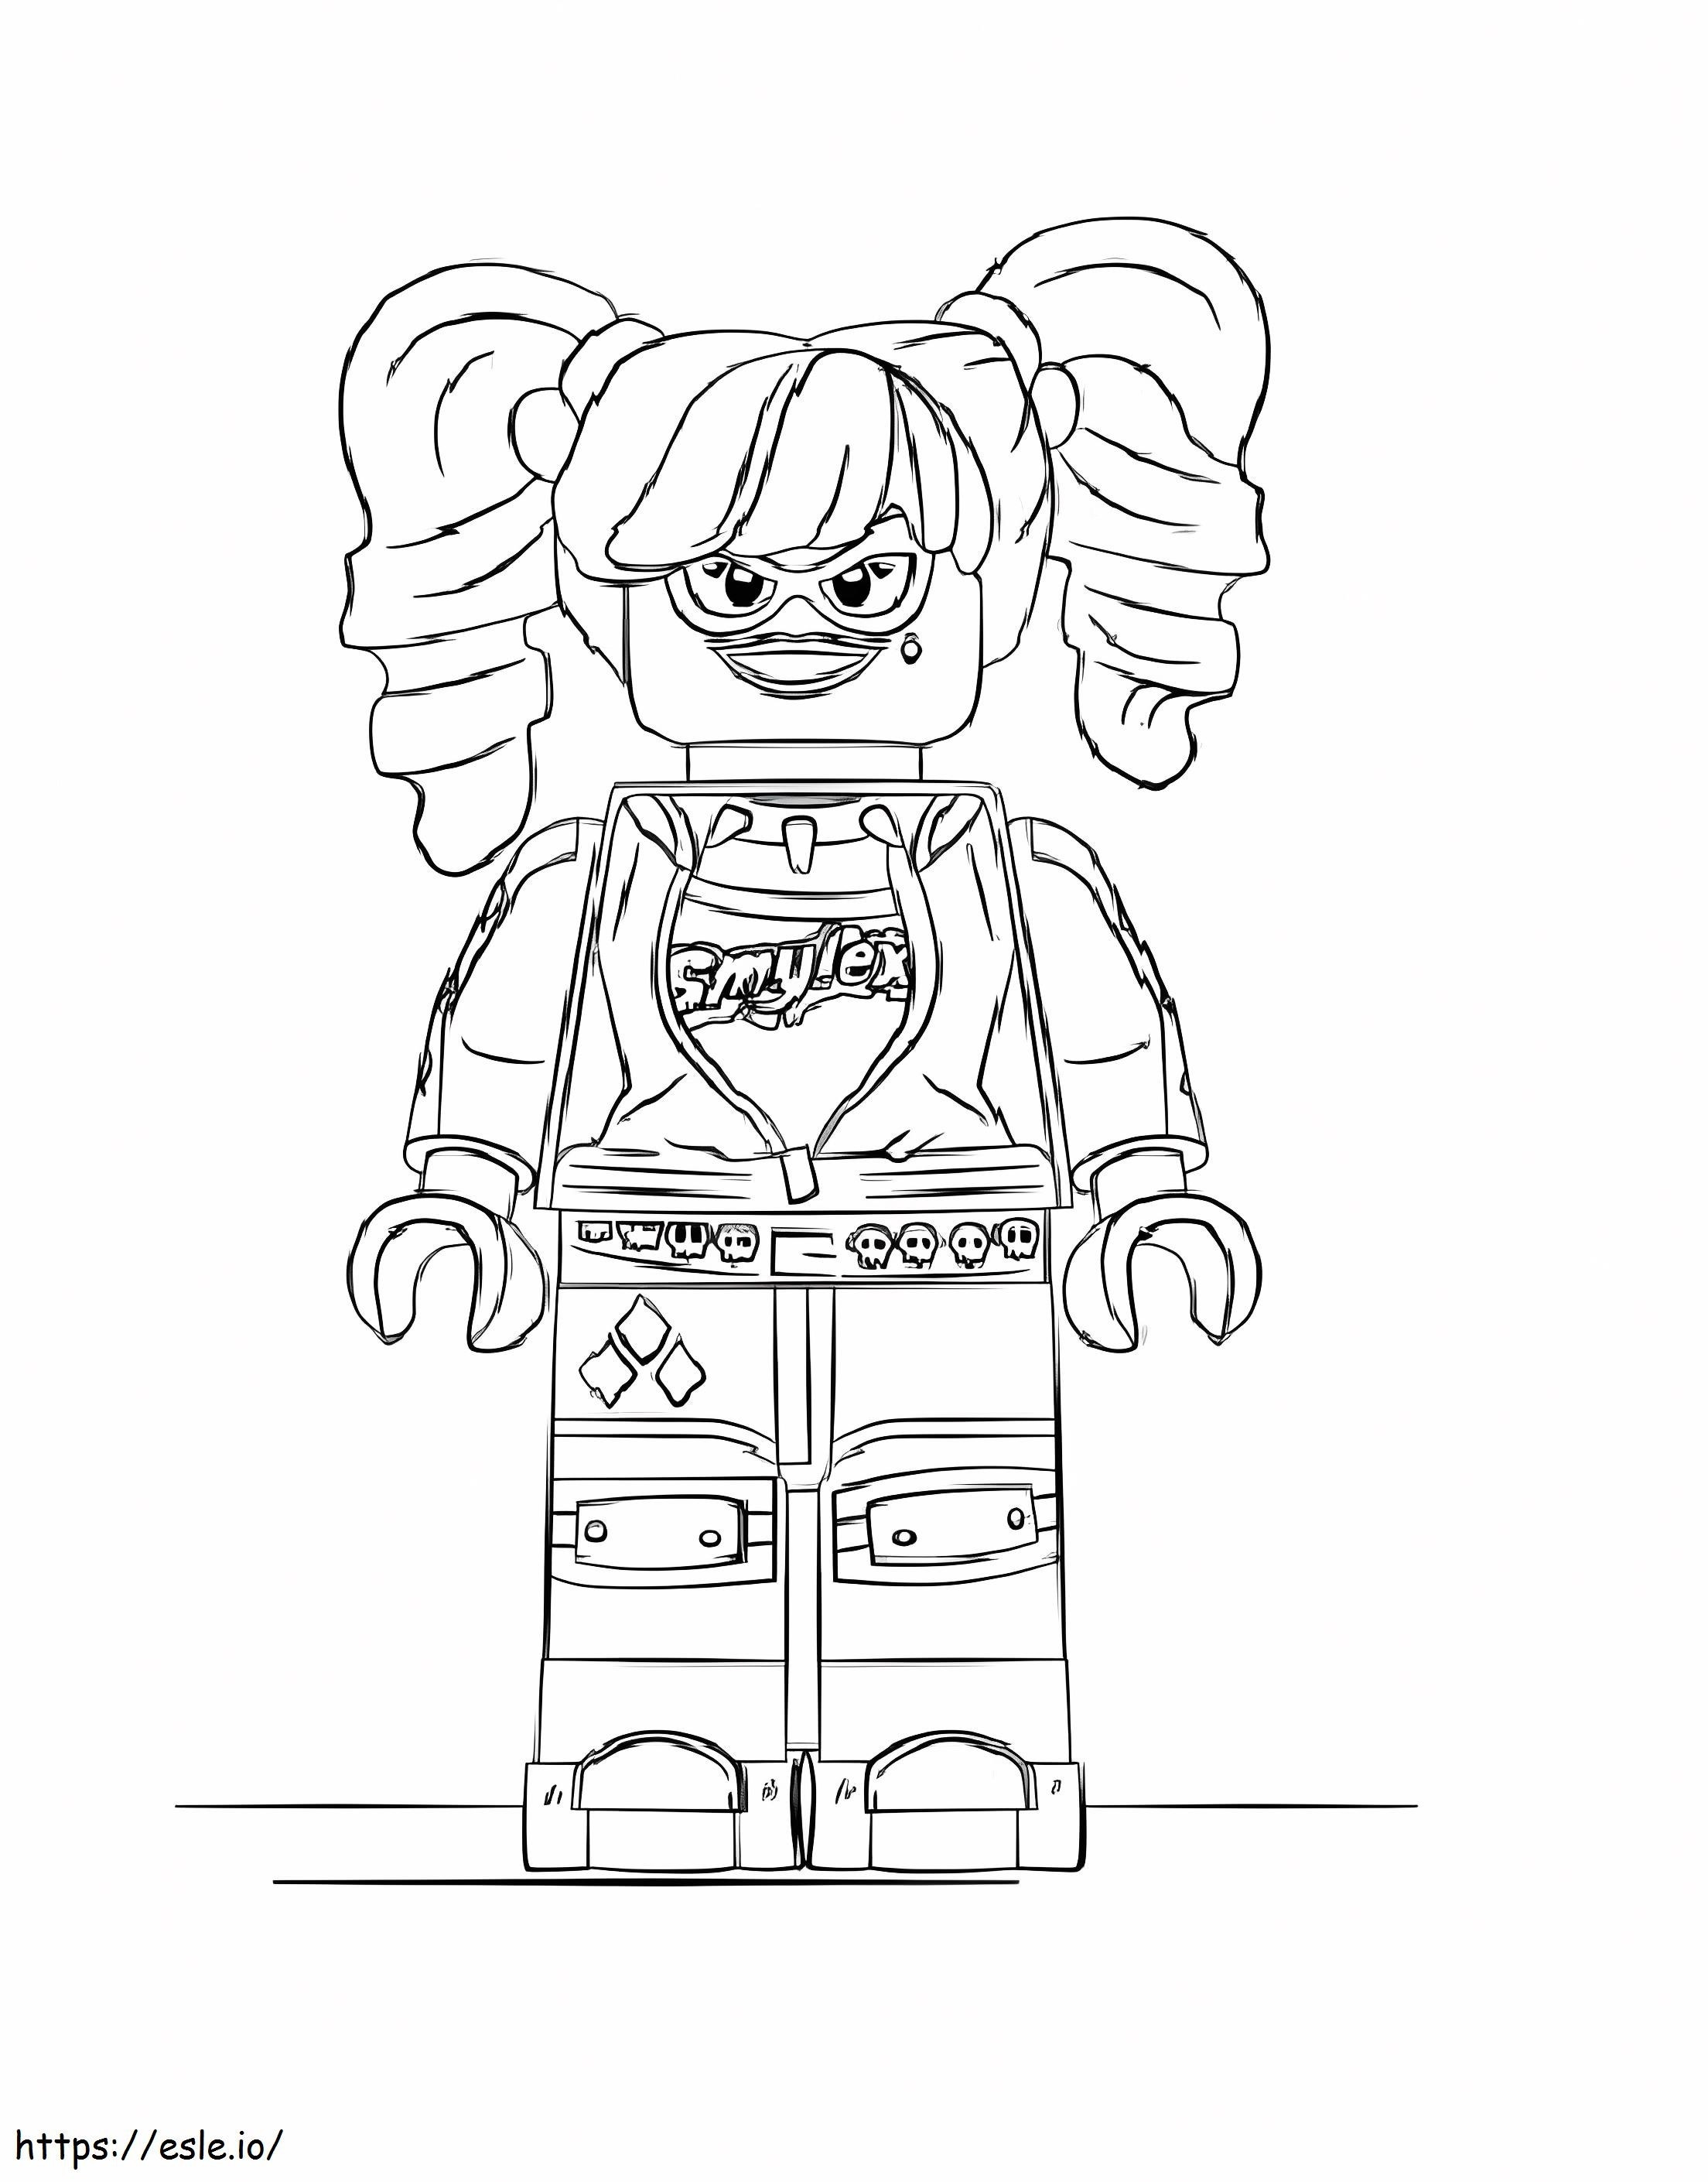 Fun Lego Harley Quinn coloring page